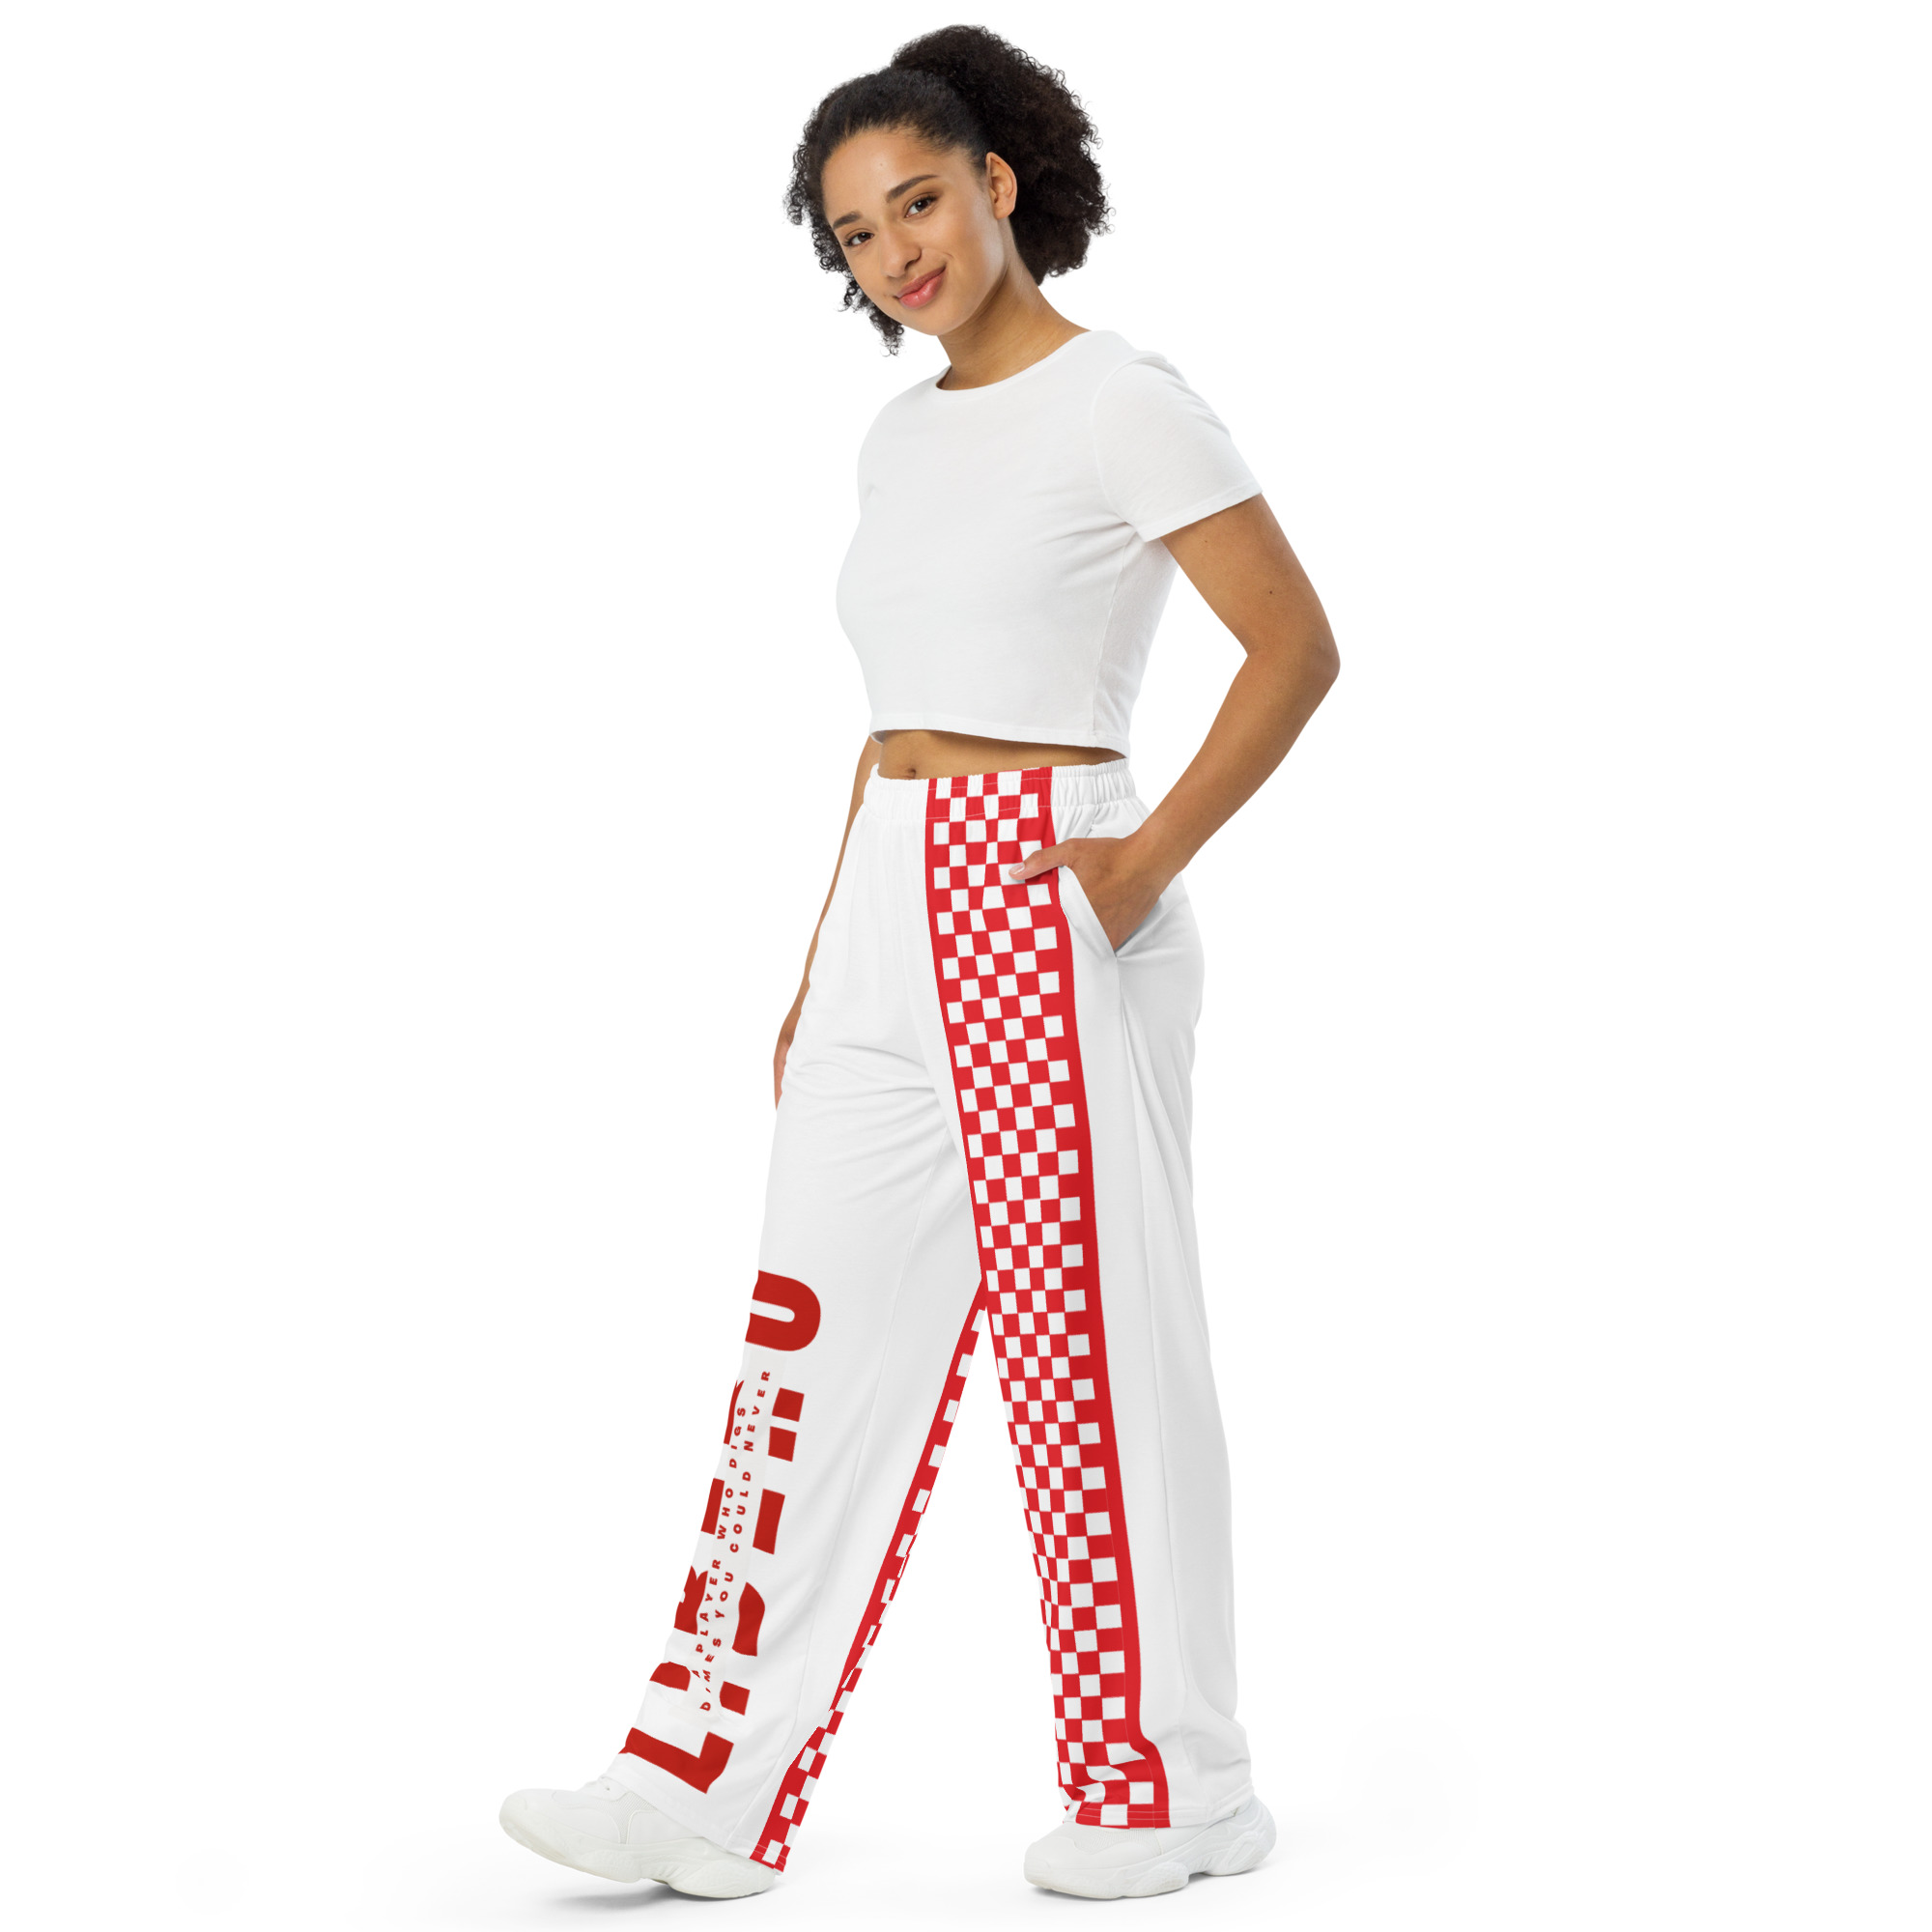 Plus, these wide leg pajama pants aren't just stylish, they're also versatile!

You can use them as beach volleyball cover-up pants or even as yoga pants or like I do as workout pants.